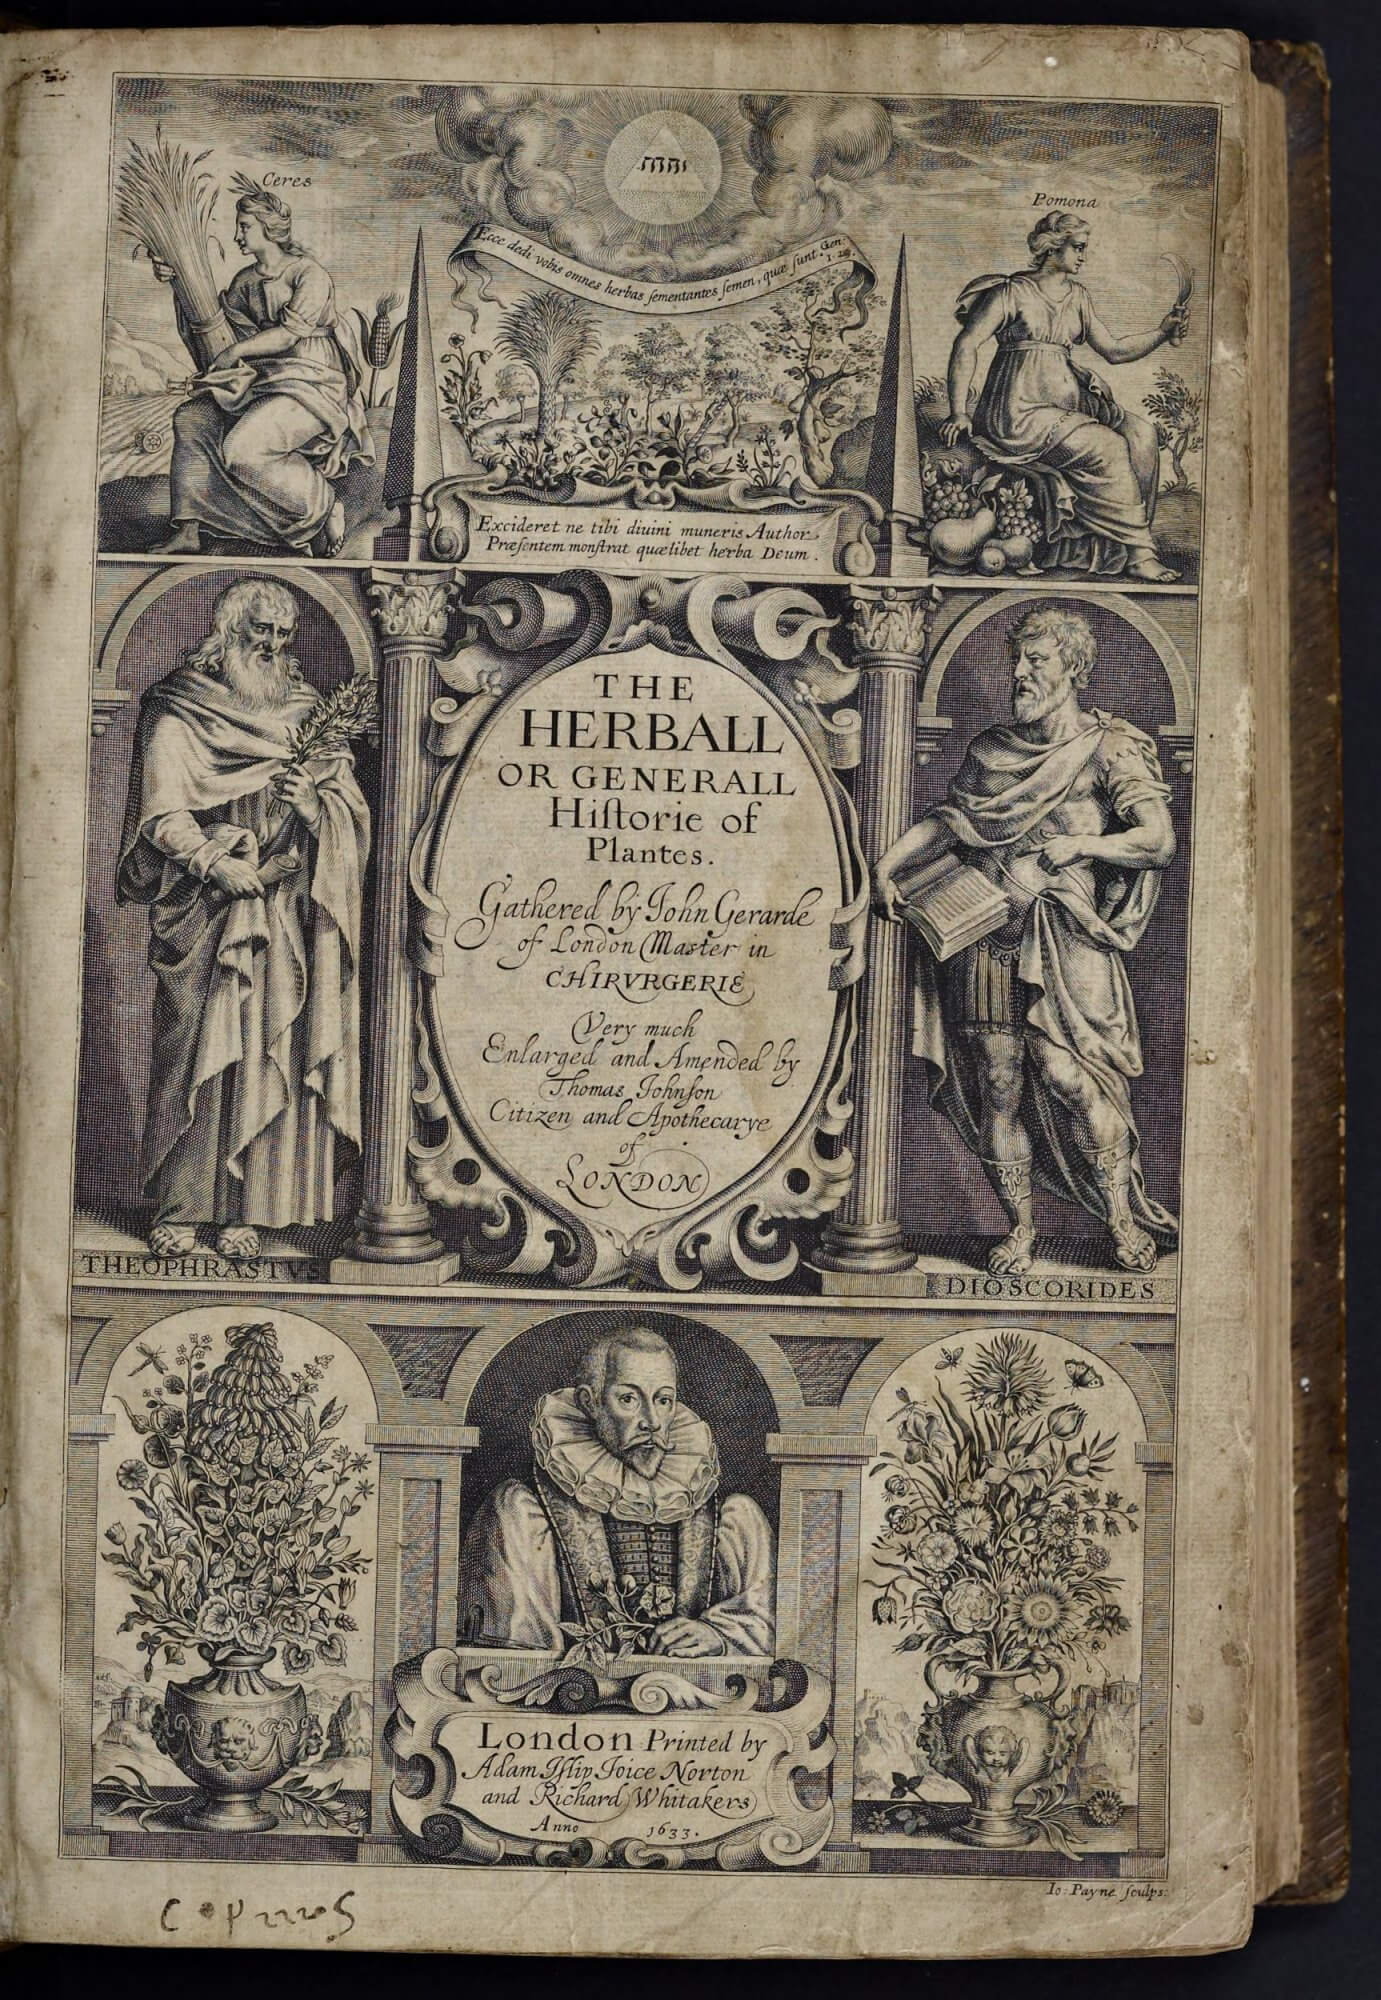 This engraved title page, with portraits not only of the author but of classical figures and with architectural structures providing an edifice tying the details together, strives to create an imposing authority for this herbal.